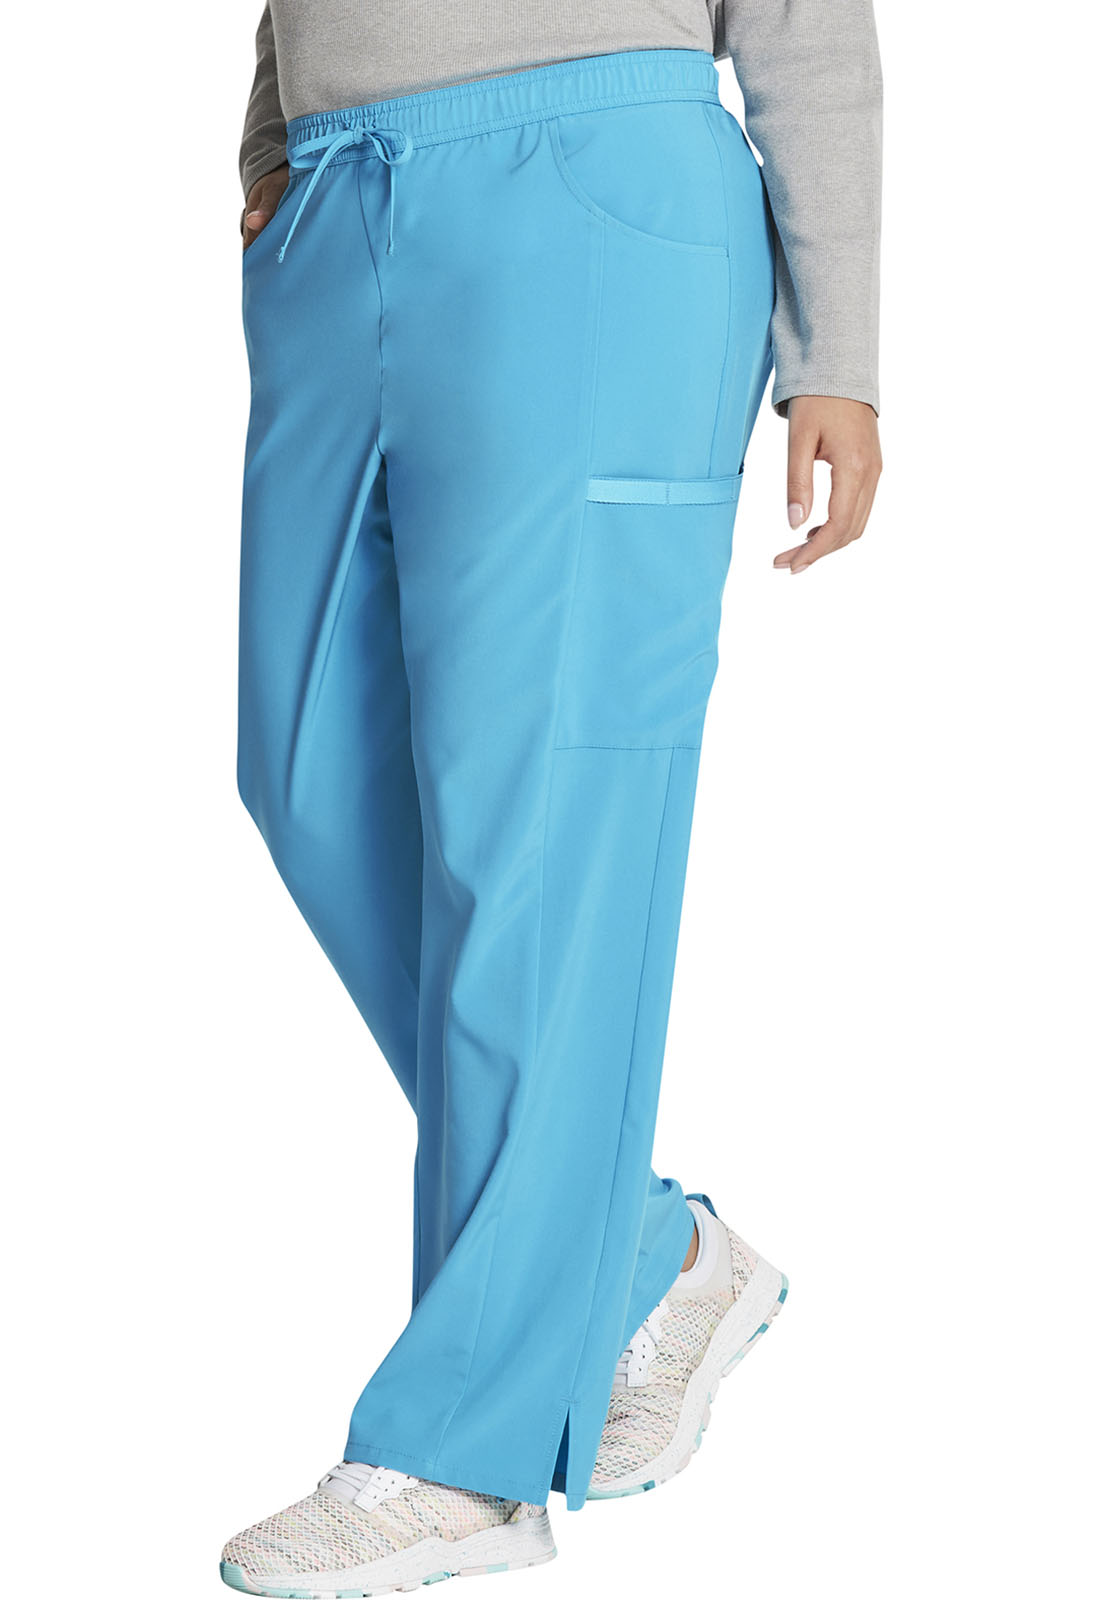 Dickies Mid Rise Straight Leg Drawstring Pant in Blue Hawaii CLEAROUT!